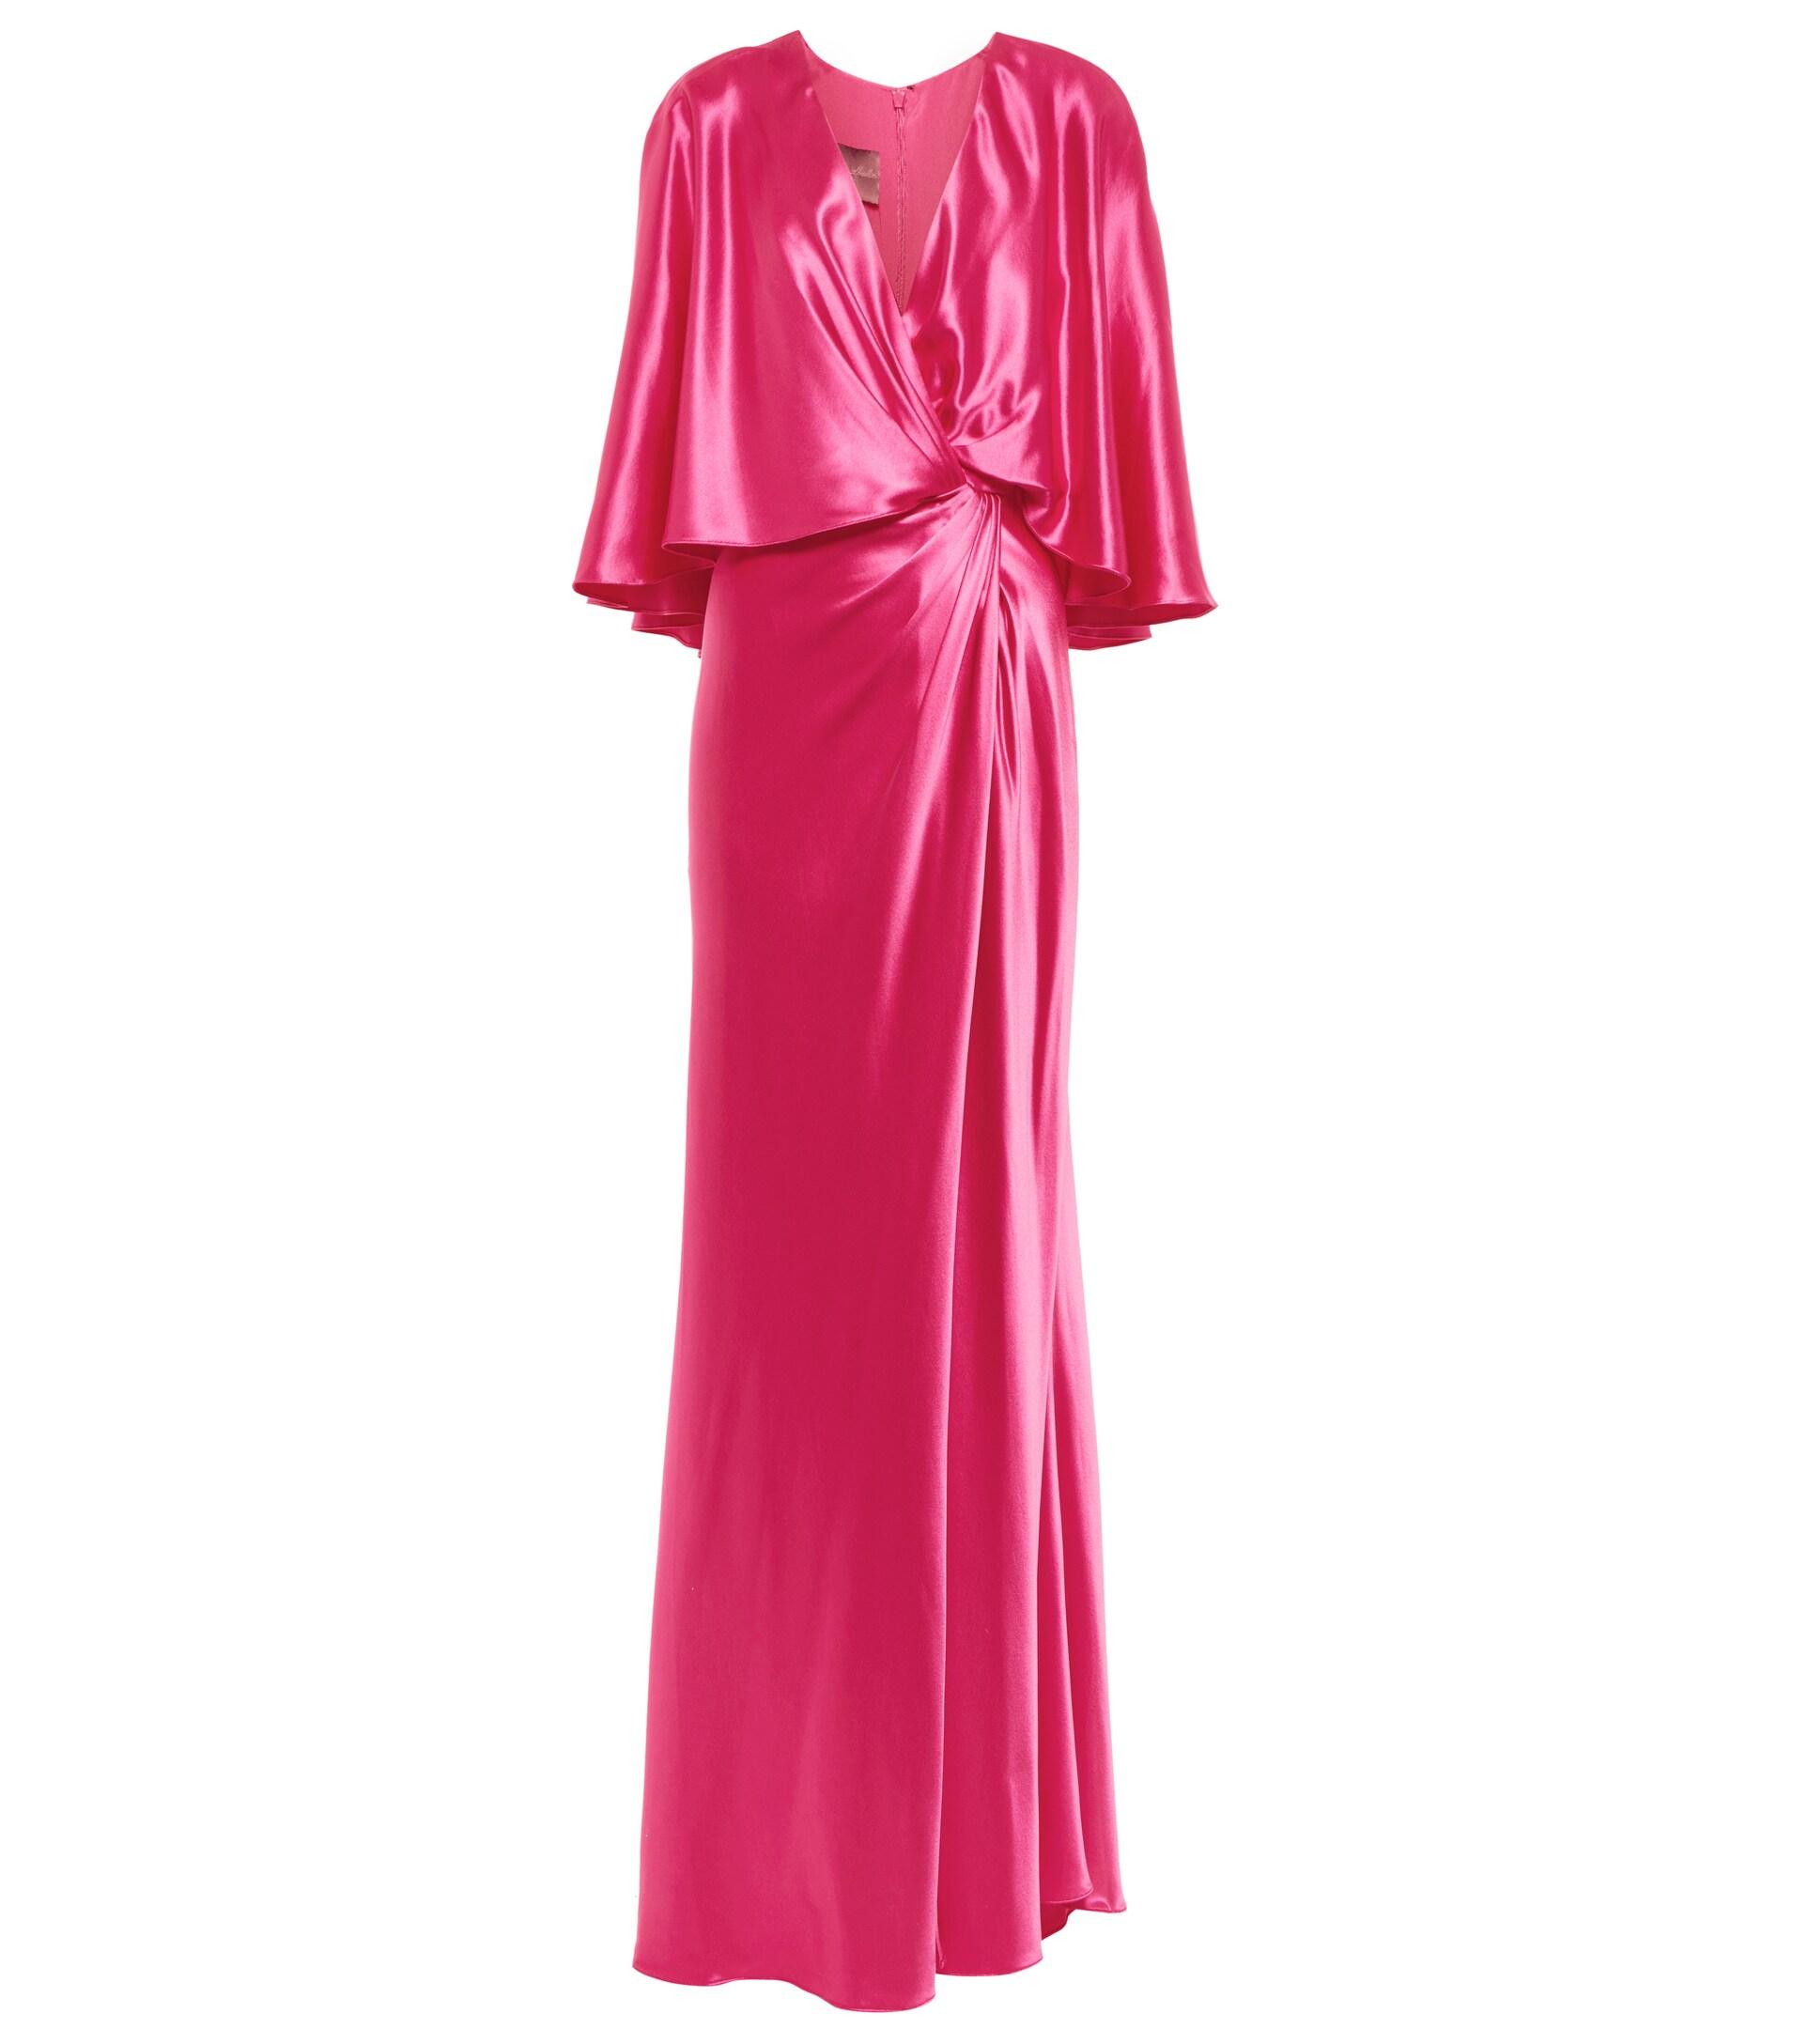 Monique Lhuillier Draped Satin Gown in Pink | Lyst